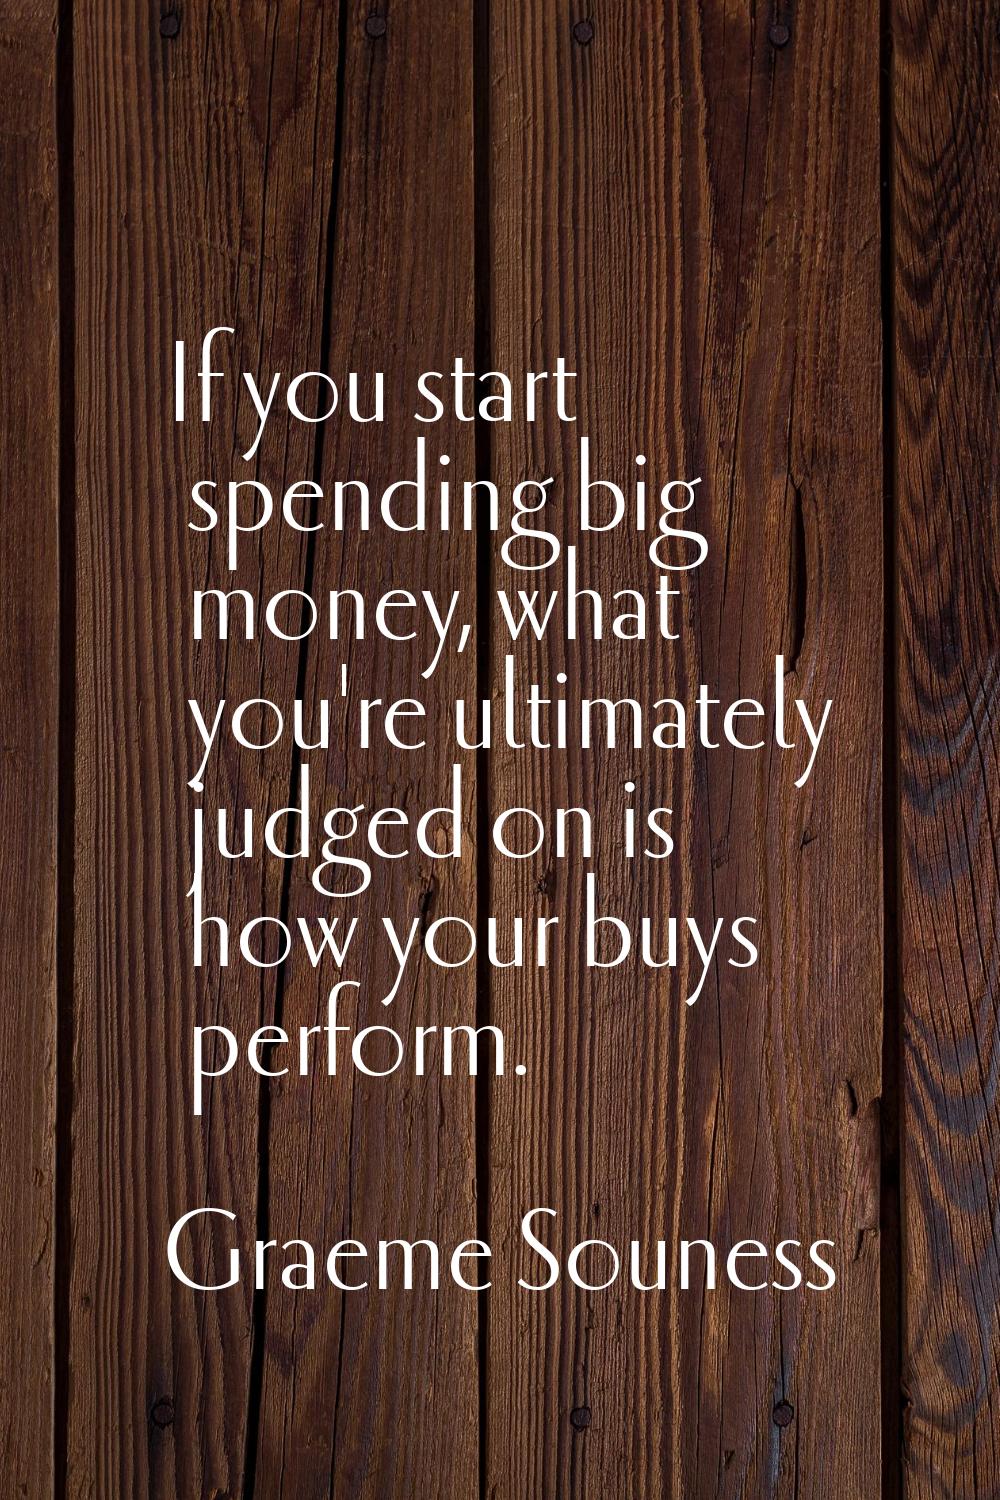 If you start spending big money, what you're ultimately judged on is how your buys perform.